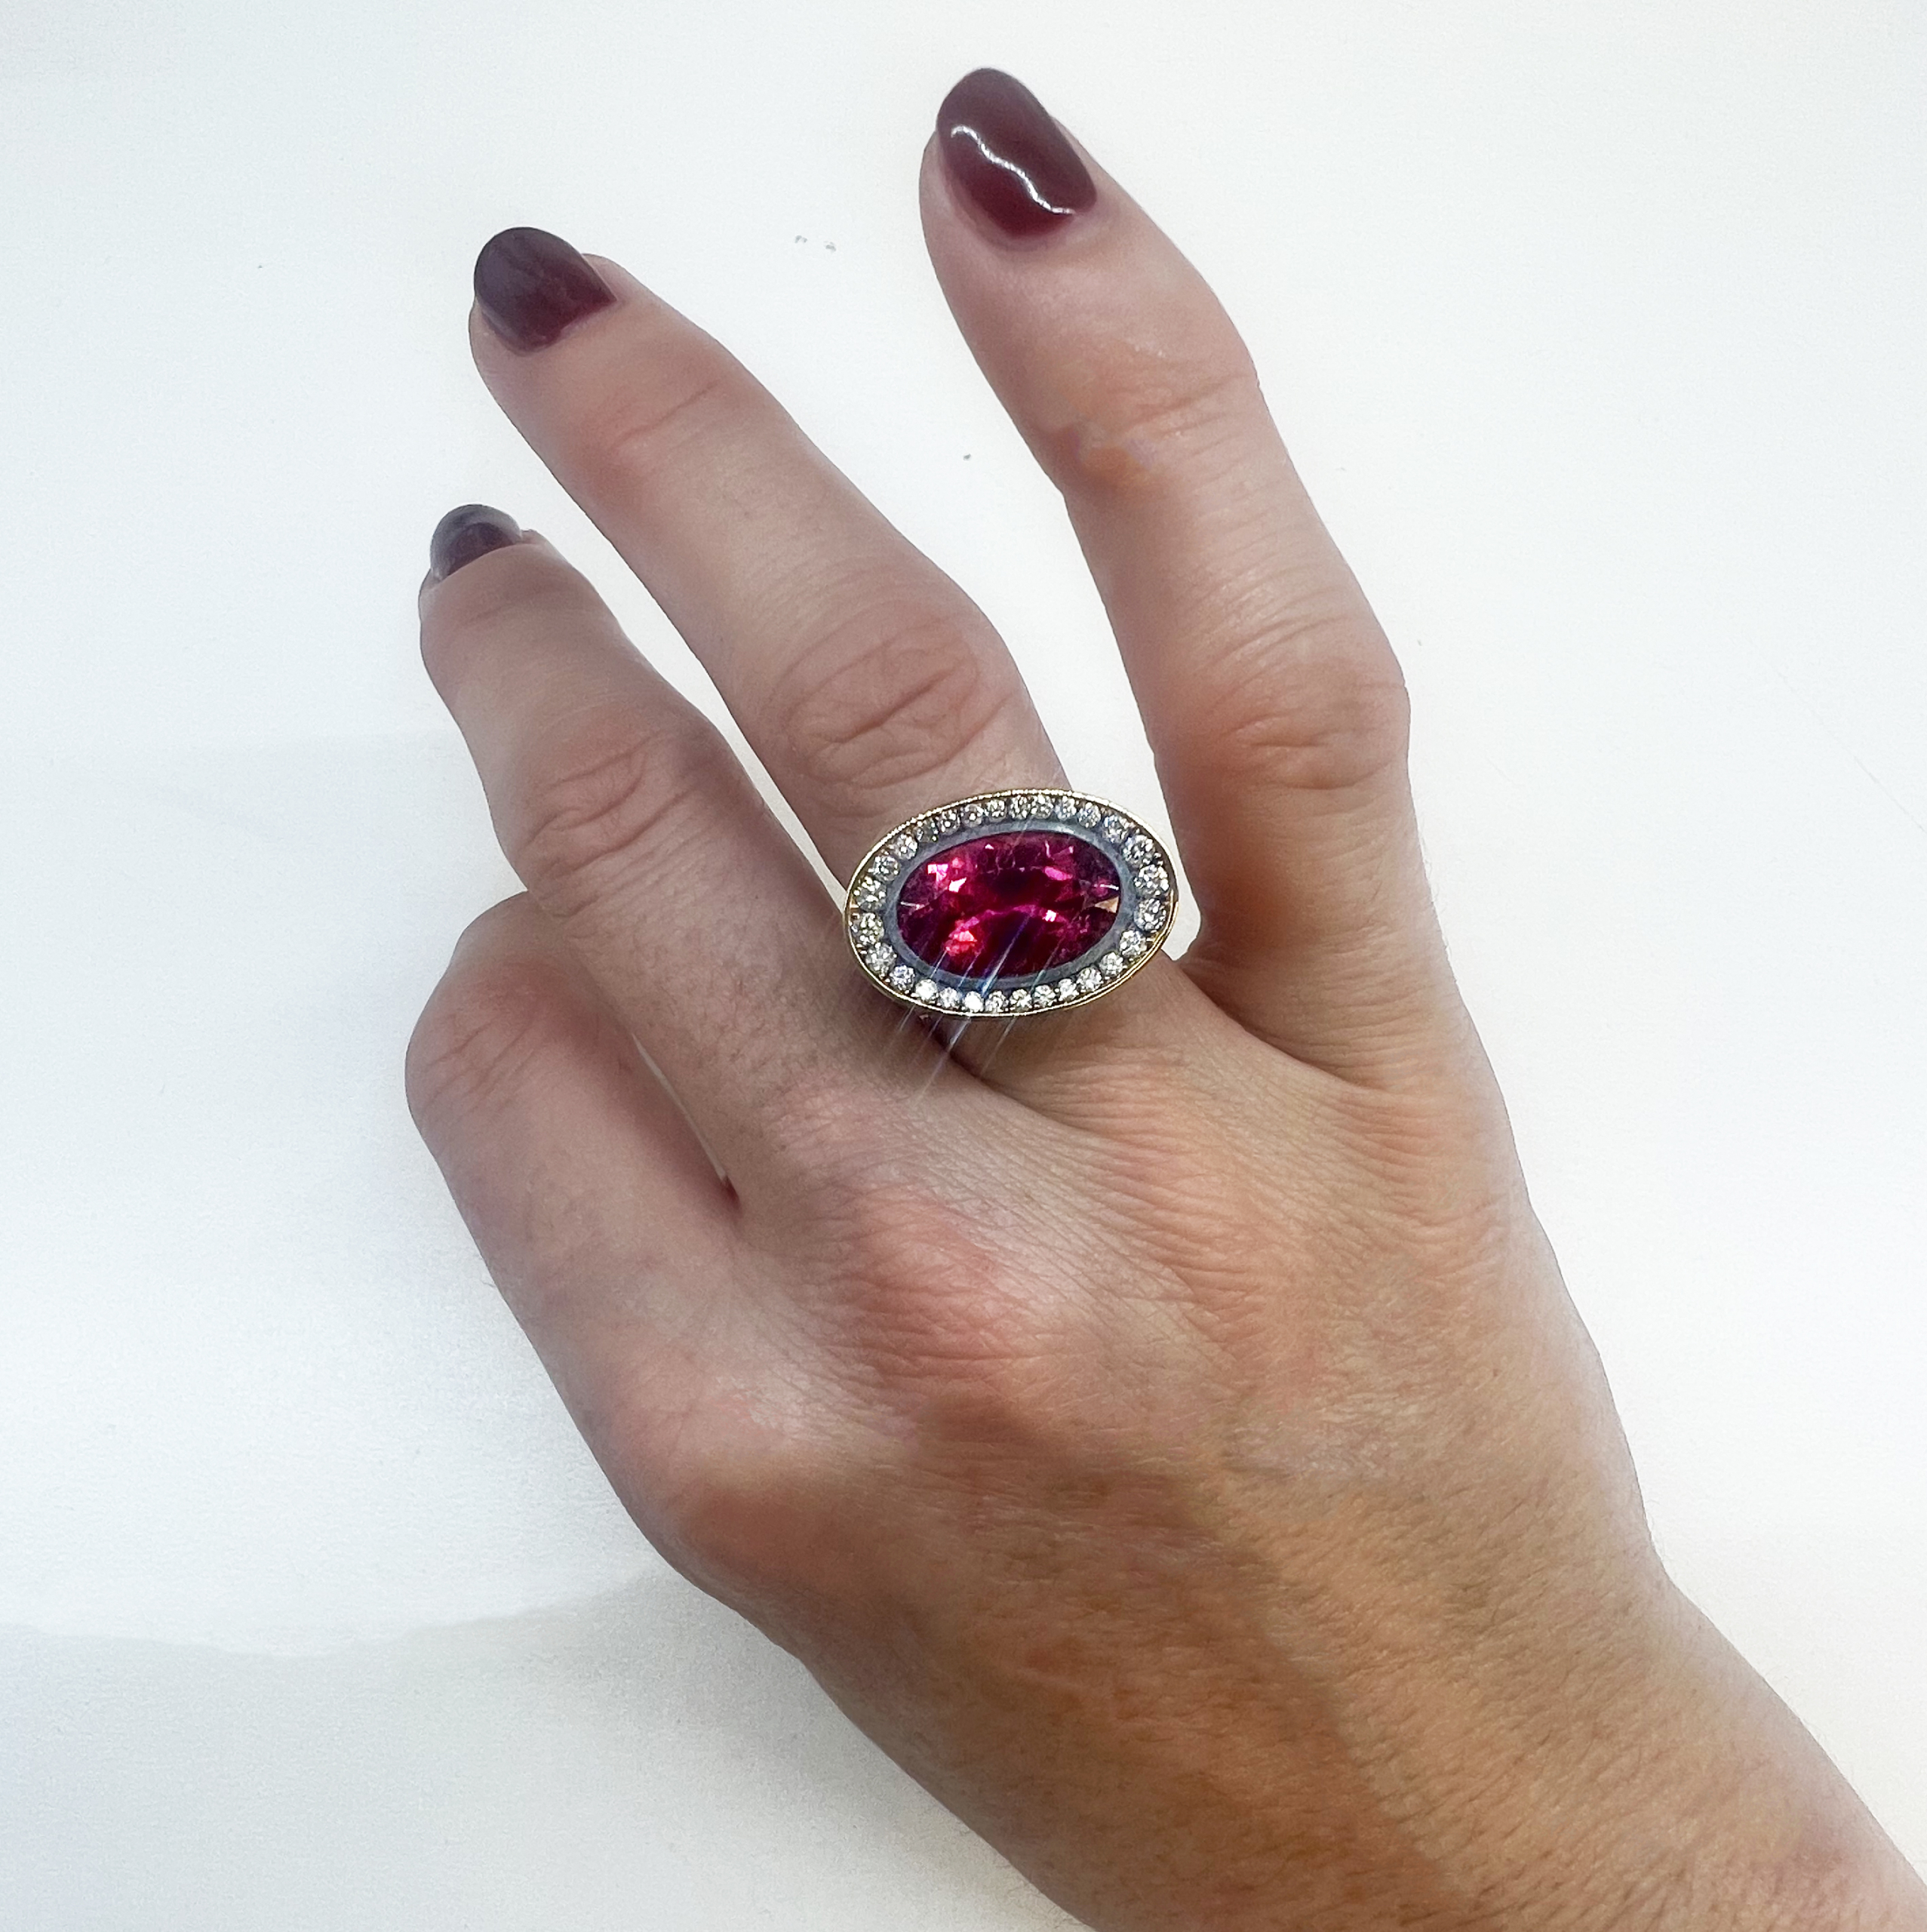 This is a photo of am east / west cocktail ring with oval pink tourmaline and pave diamond surround